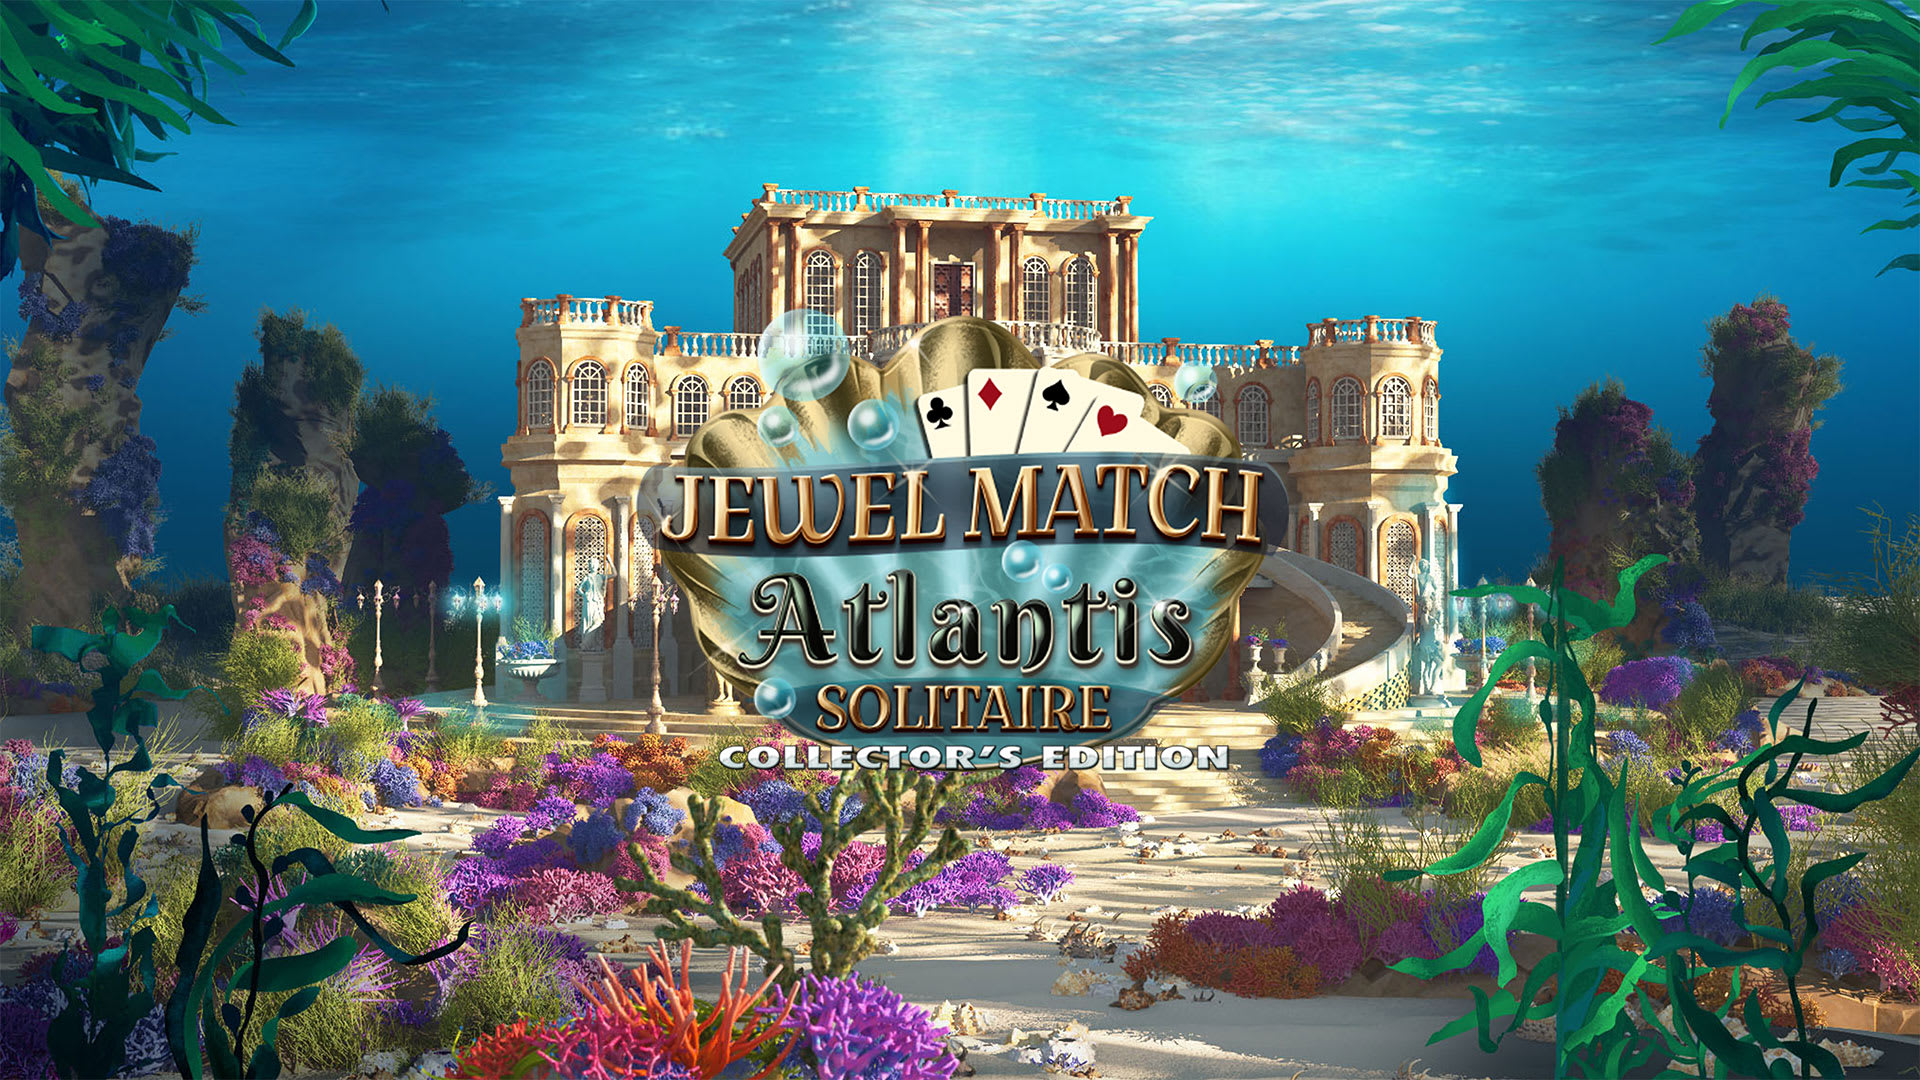 Jewel Match Atlantis Solitaire Collector's Edition